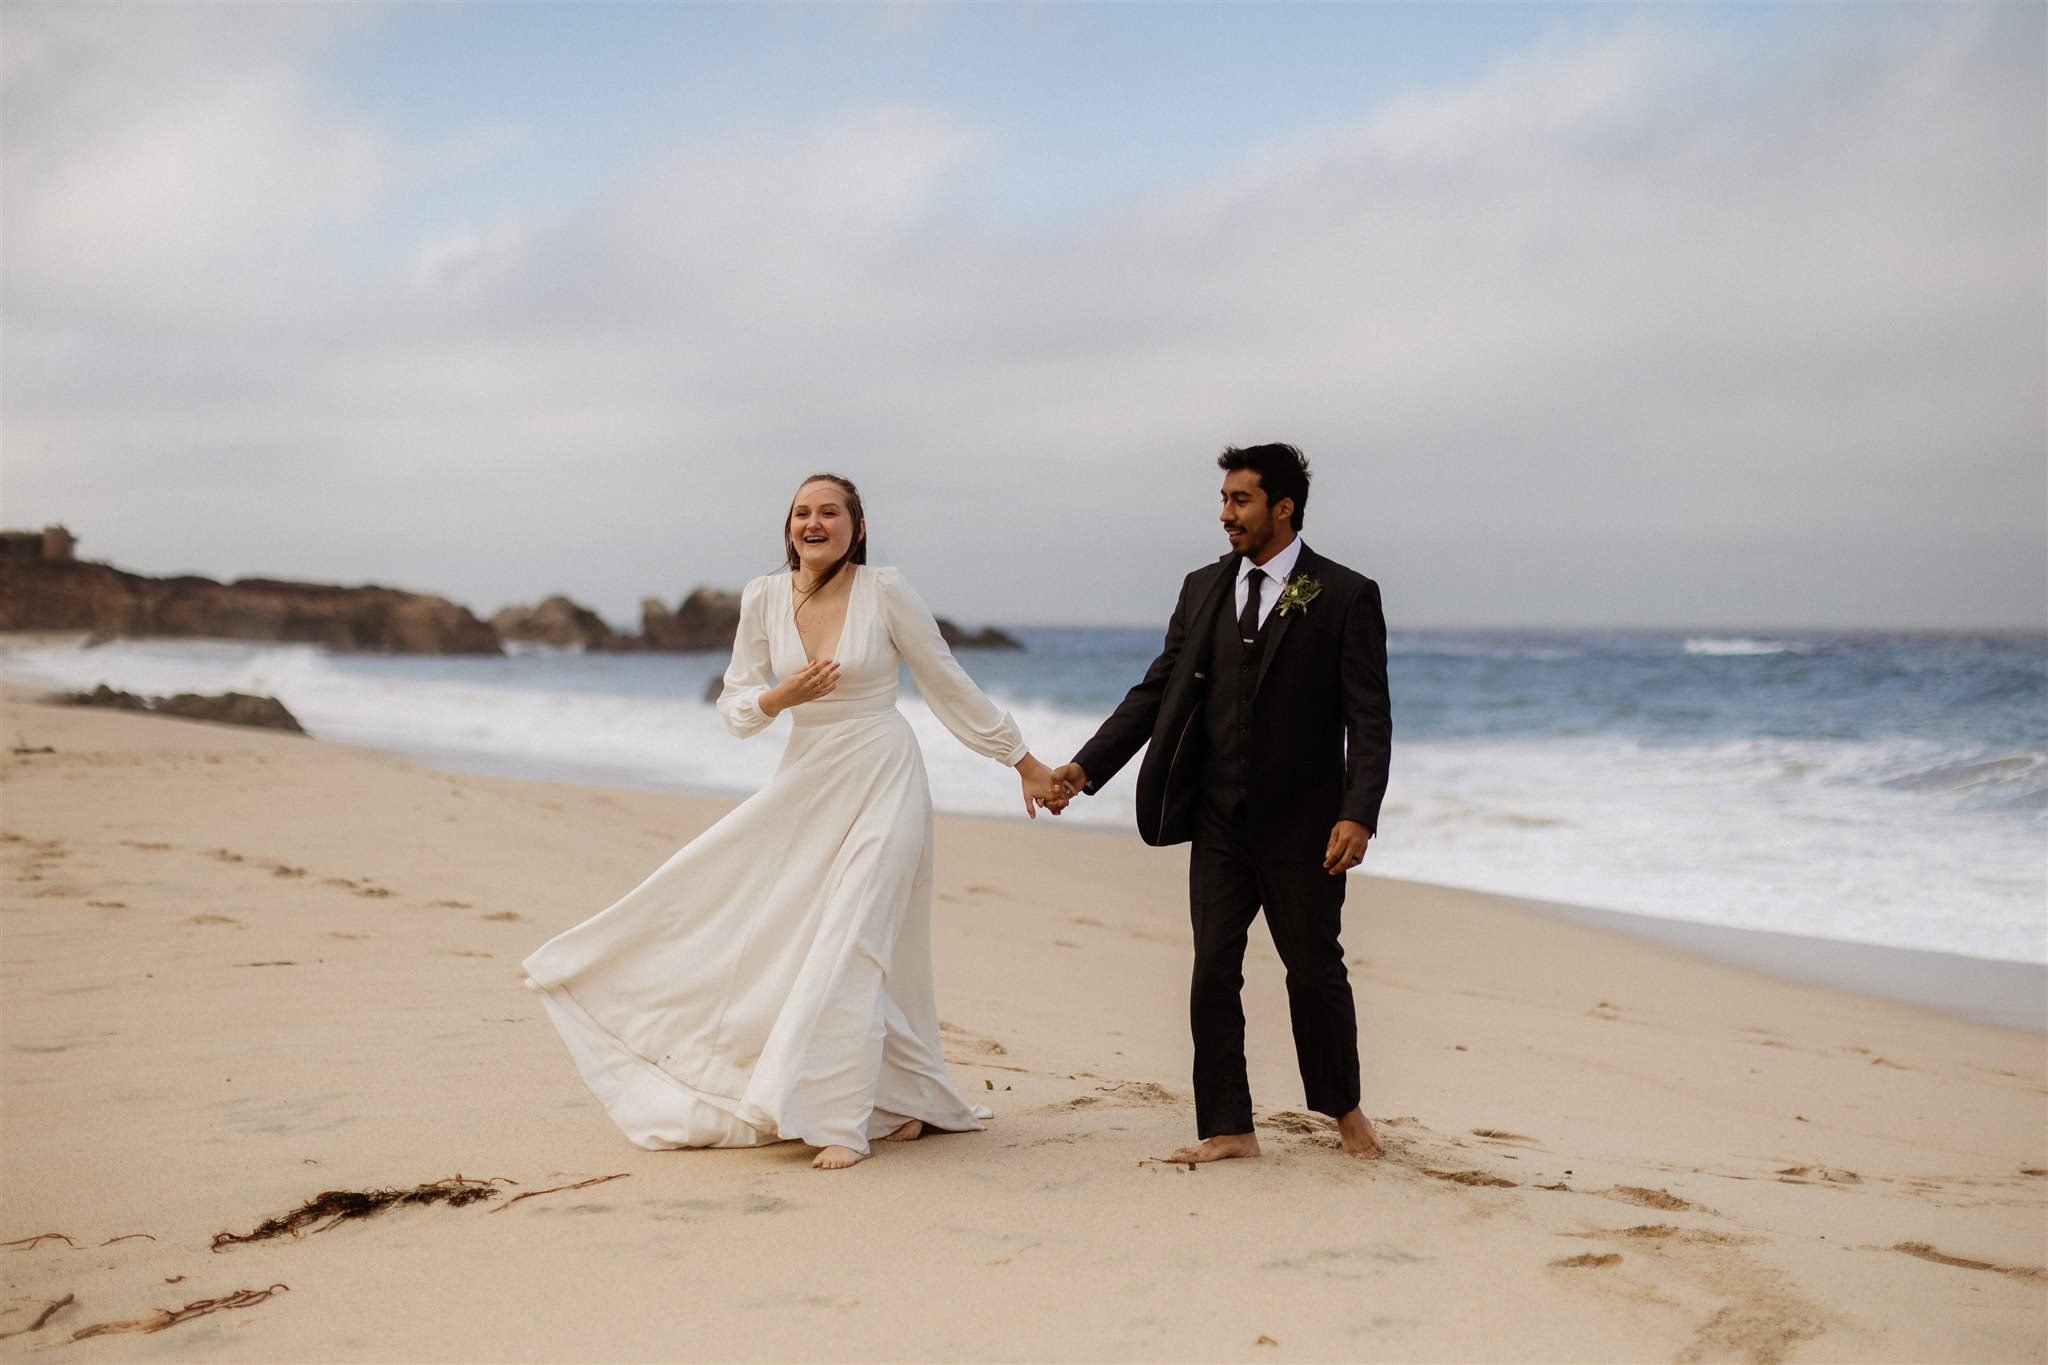 131_Two-Day Big Sur Redwoods Elopement with Family_Will Khoury Elopement Photographer.jpg